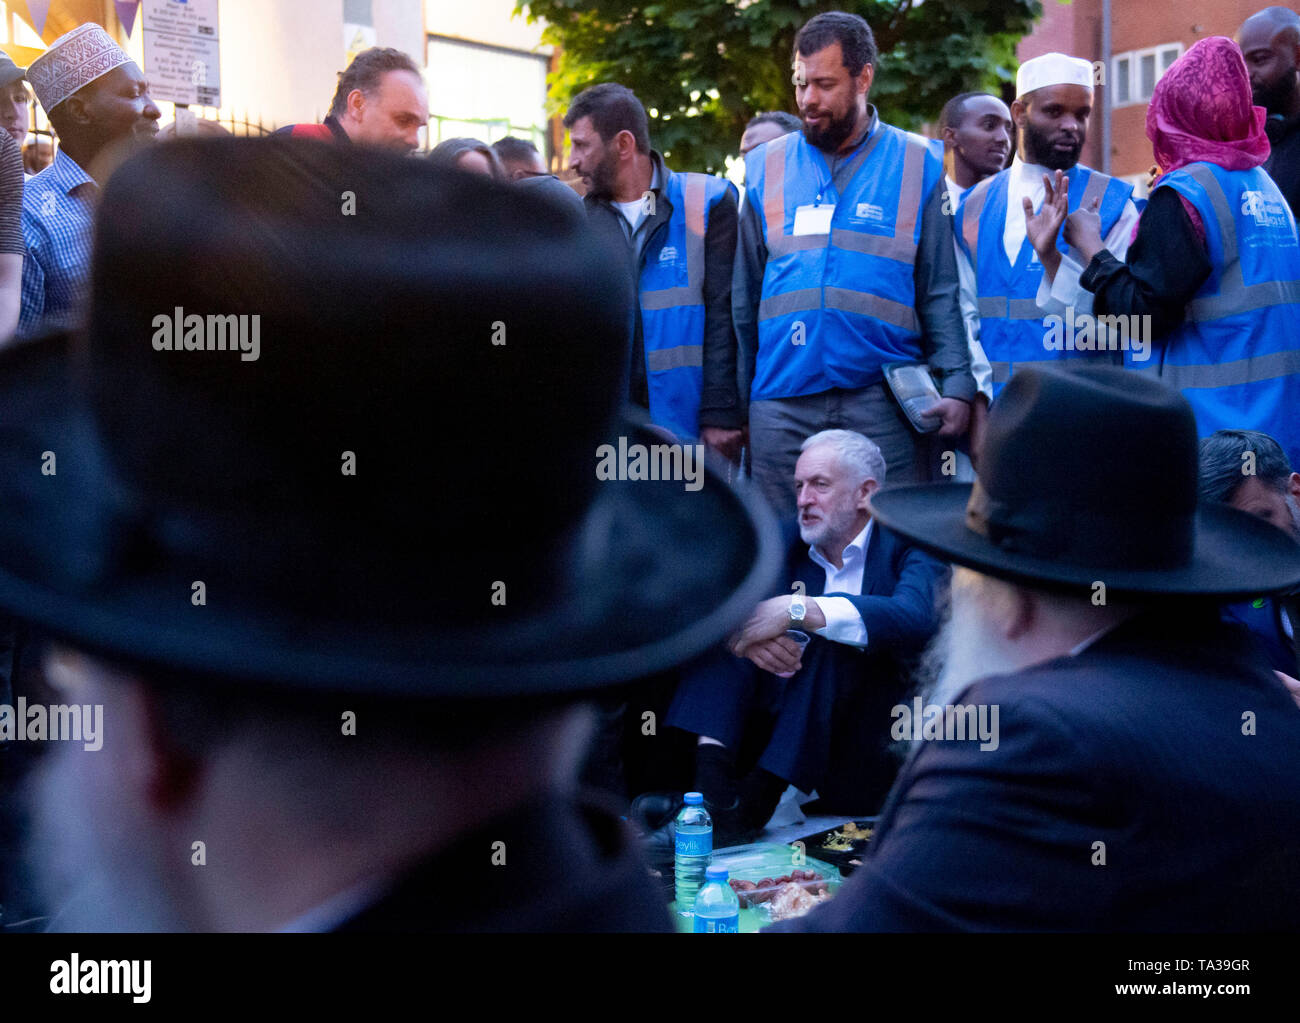 Labour Party leader Jeremy Corbyn joins a street iftar meal outside Finsbury Park Mosque in London, on the second anniversary of the Finsbury Park terrorist attack. Stock Photo